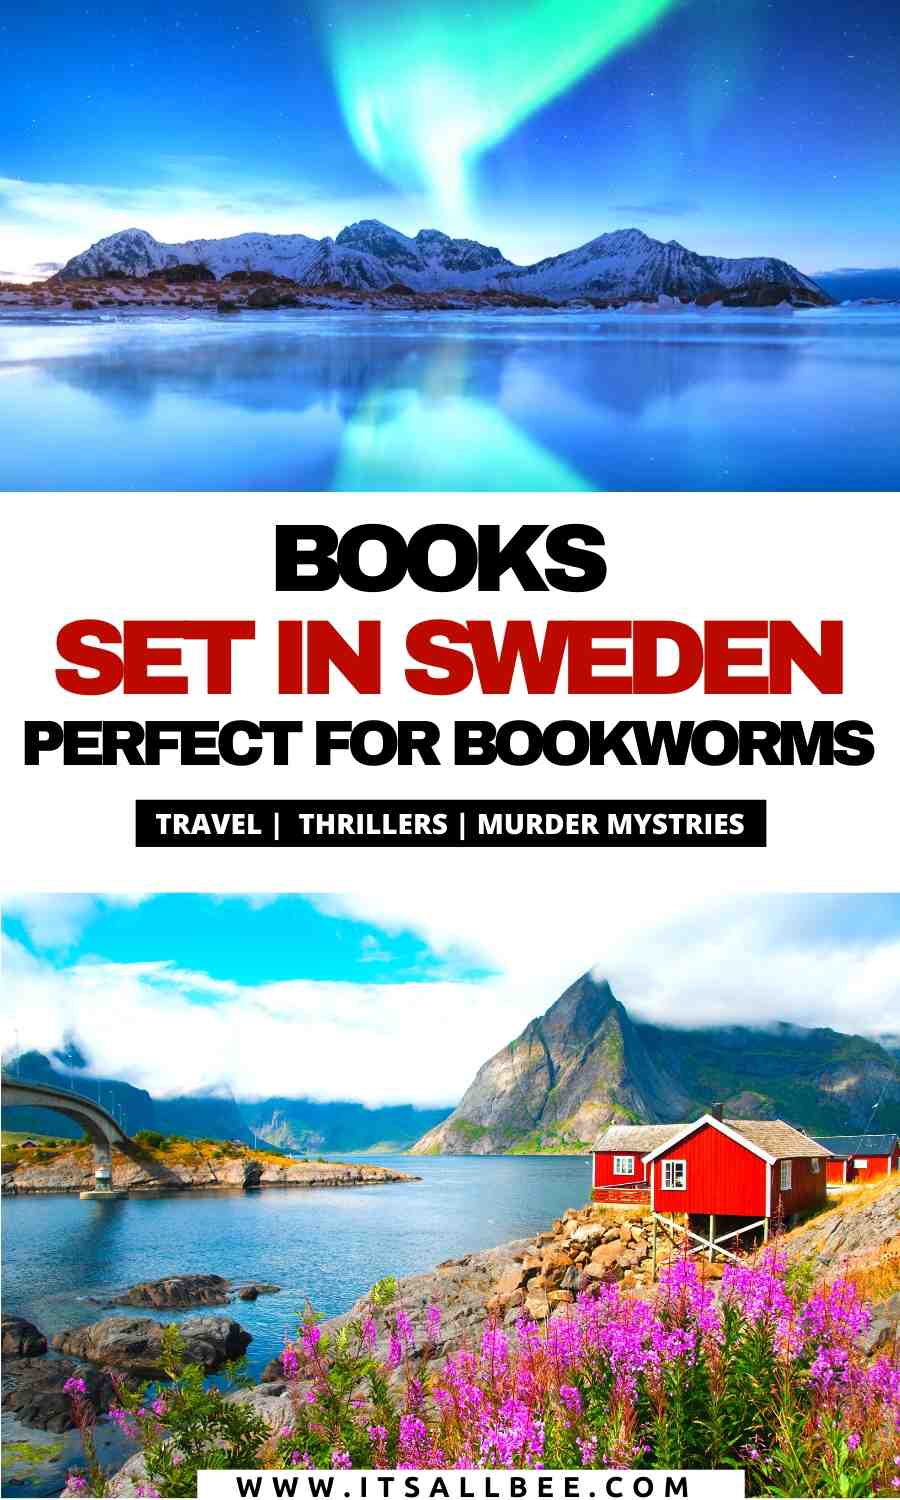 Books set Sweden | Books about Sweden | Books on Sweden | Novels set in Sweden | travel books about sweden